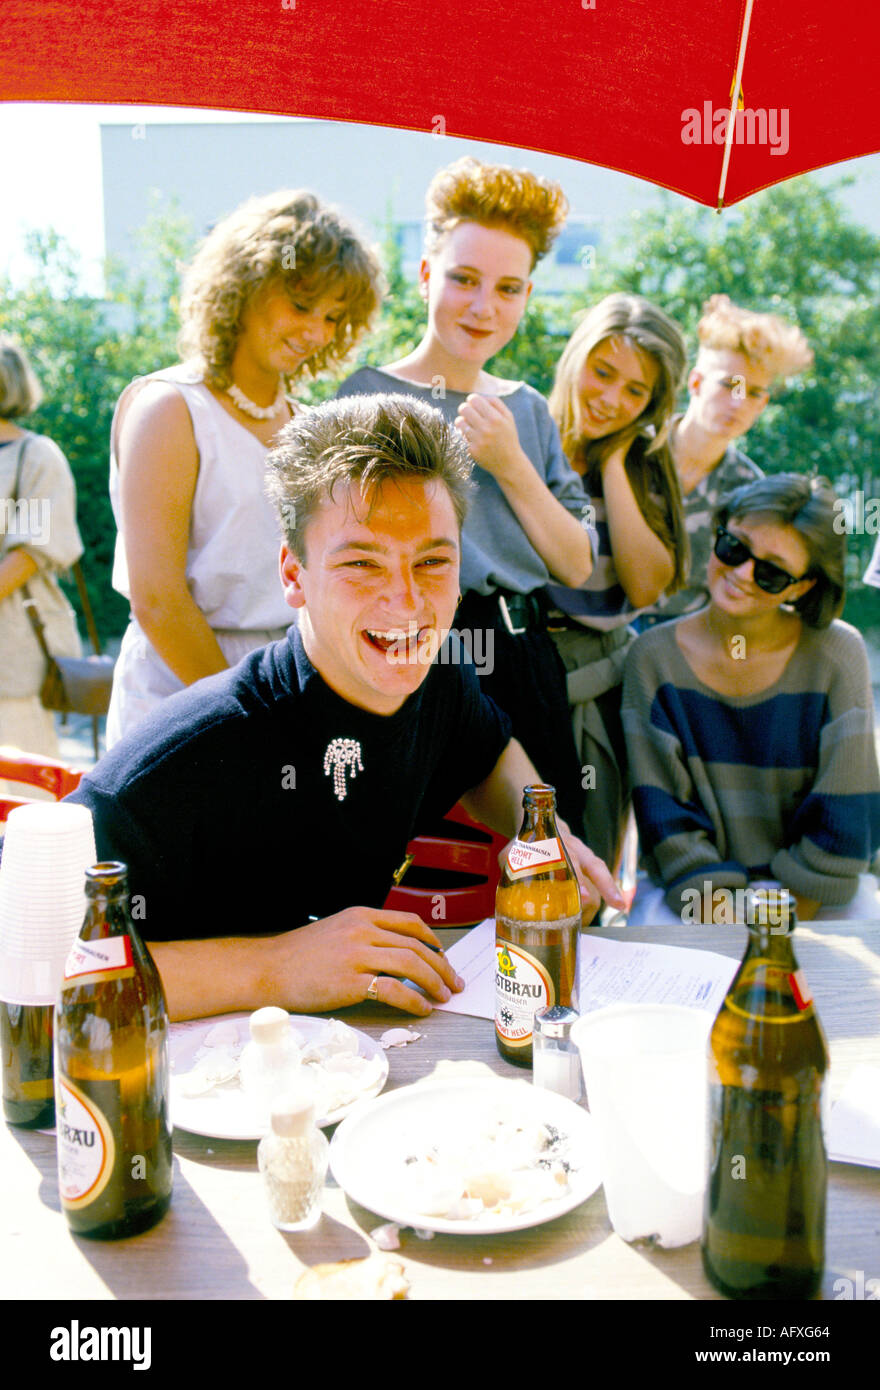 Teenage girl fans groupies with Mark O'Toole from British band Frankie Goes To Hollywood. Munich Germany 1983 1980s. German TV show Popcorn. HOMER SYK Stock Photo